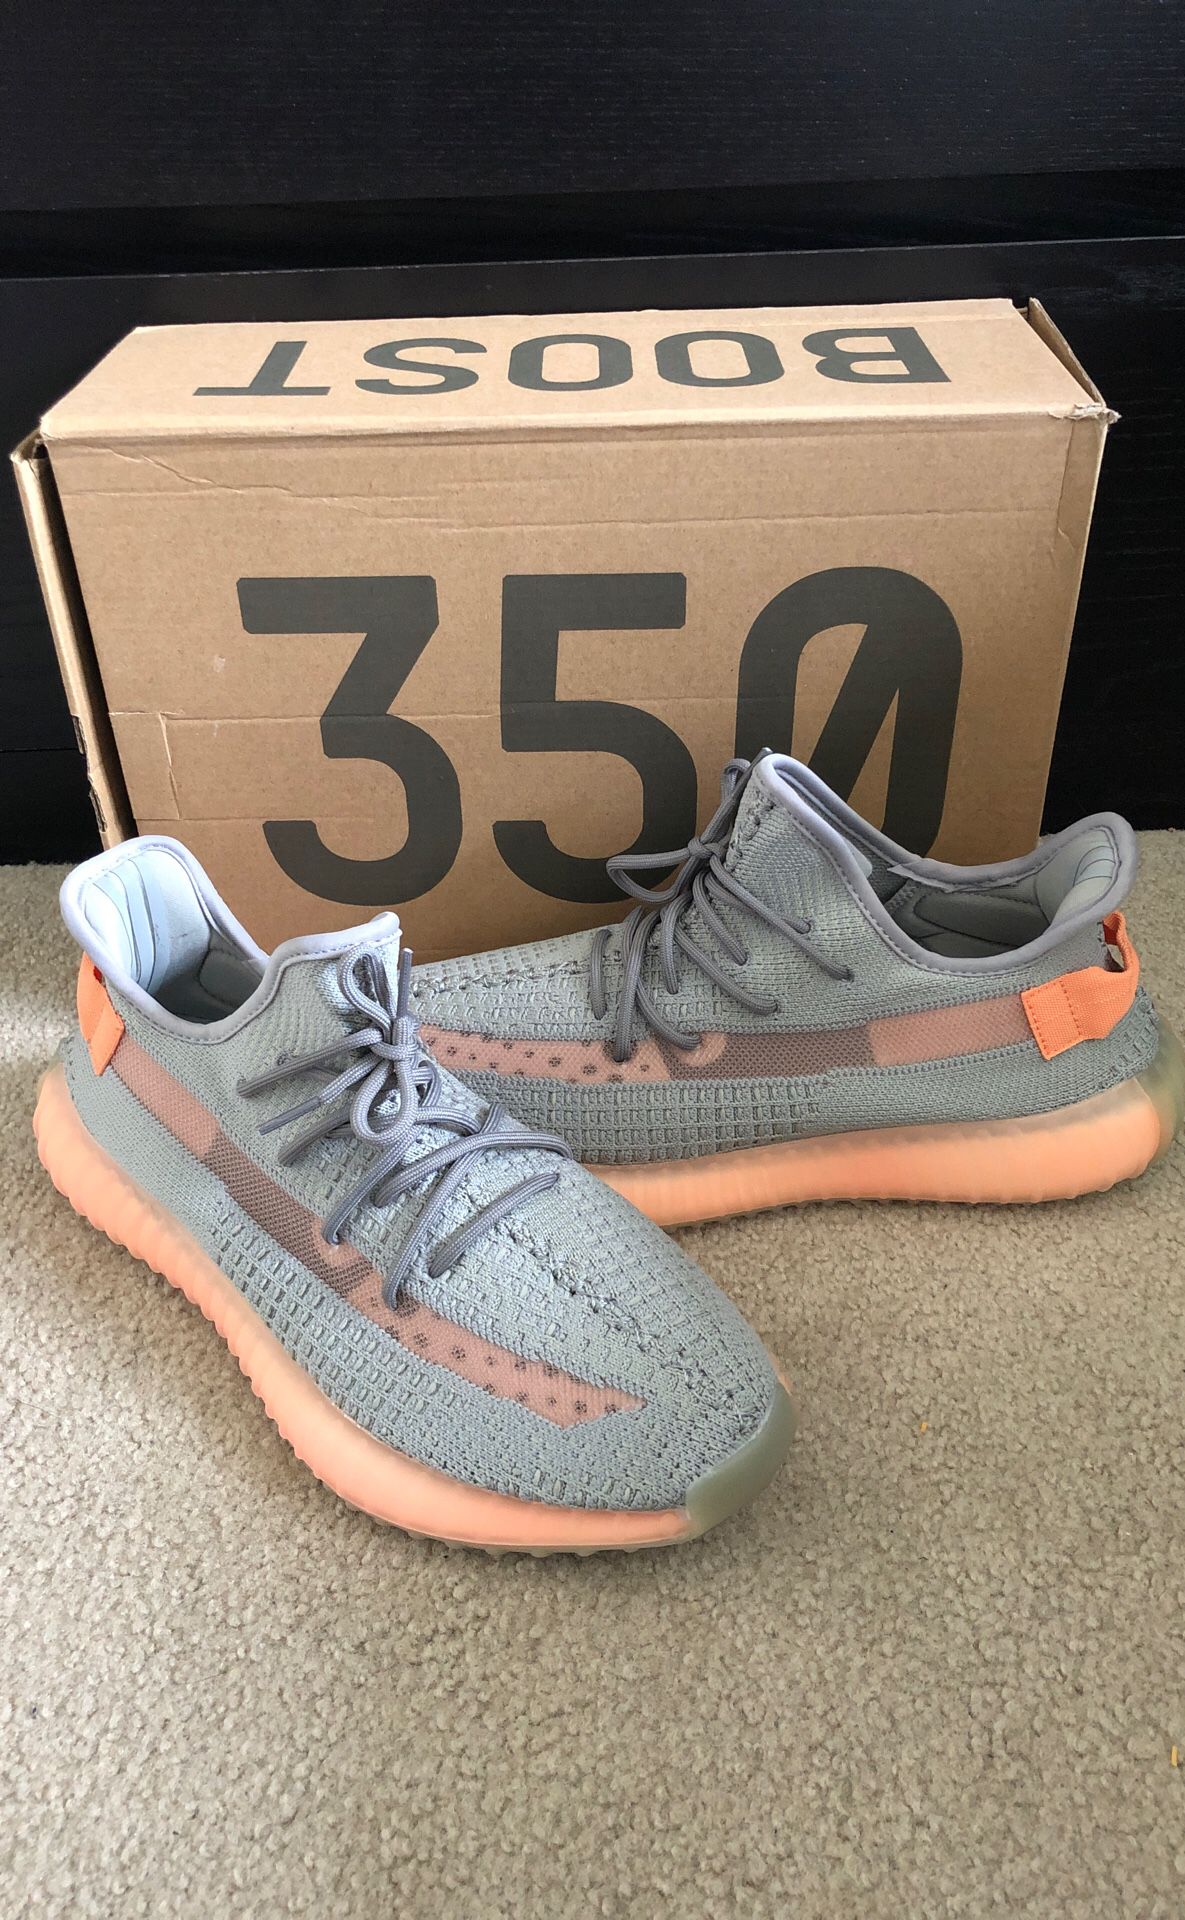 Authentic Yeezy Boost 350 v2 men's size 11 for Sale Harrisburg, PA - OfferUp